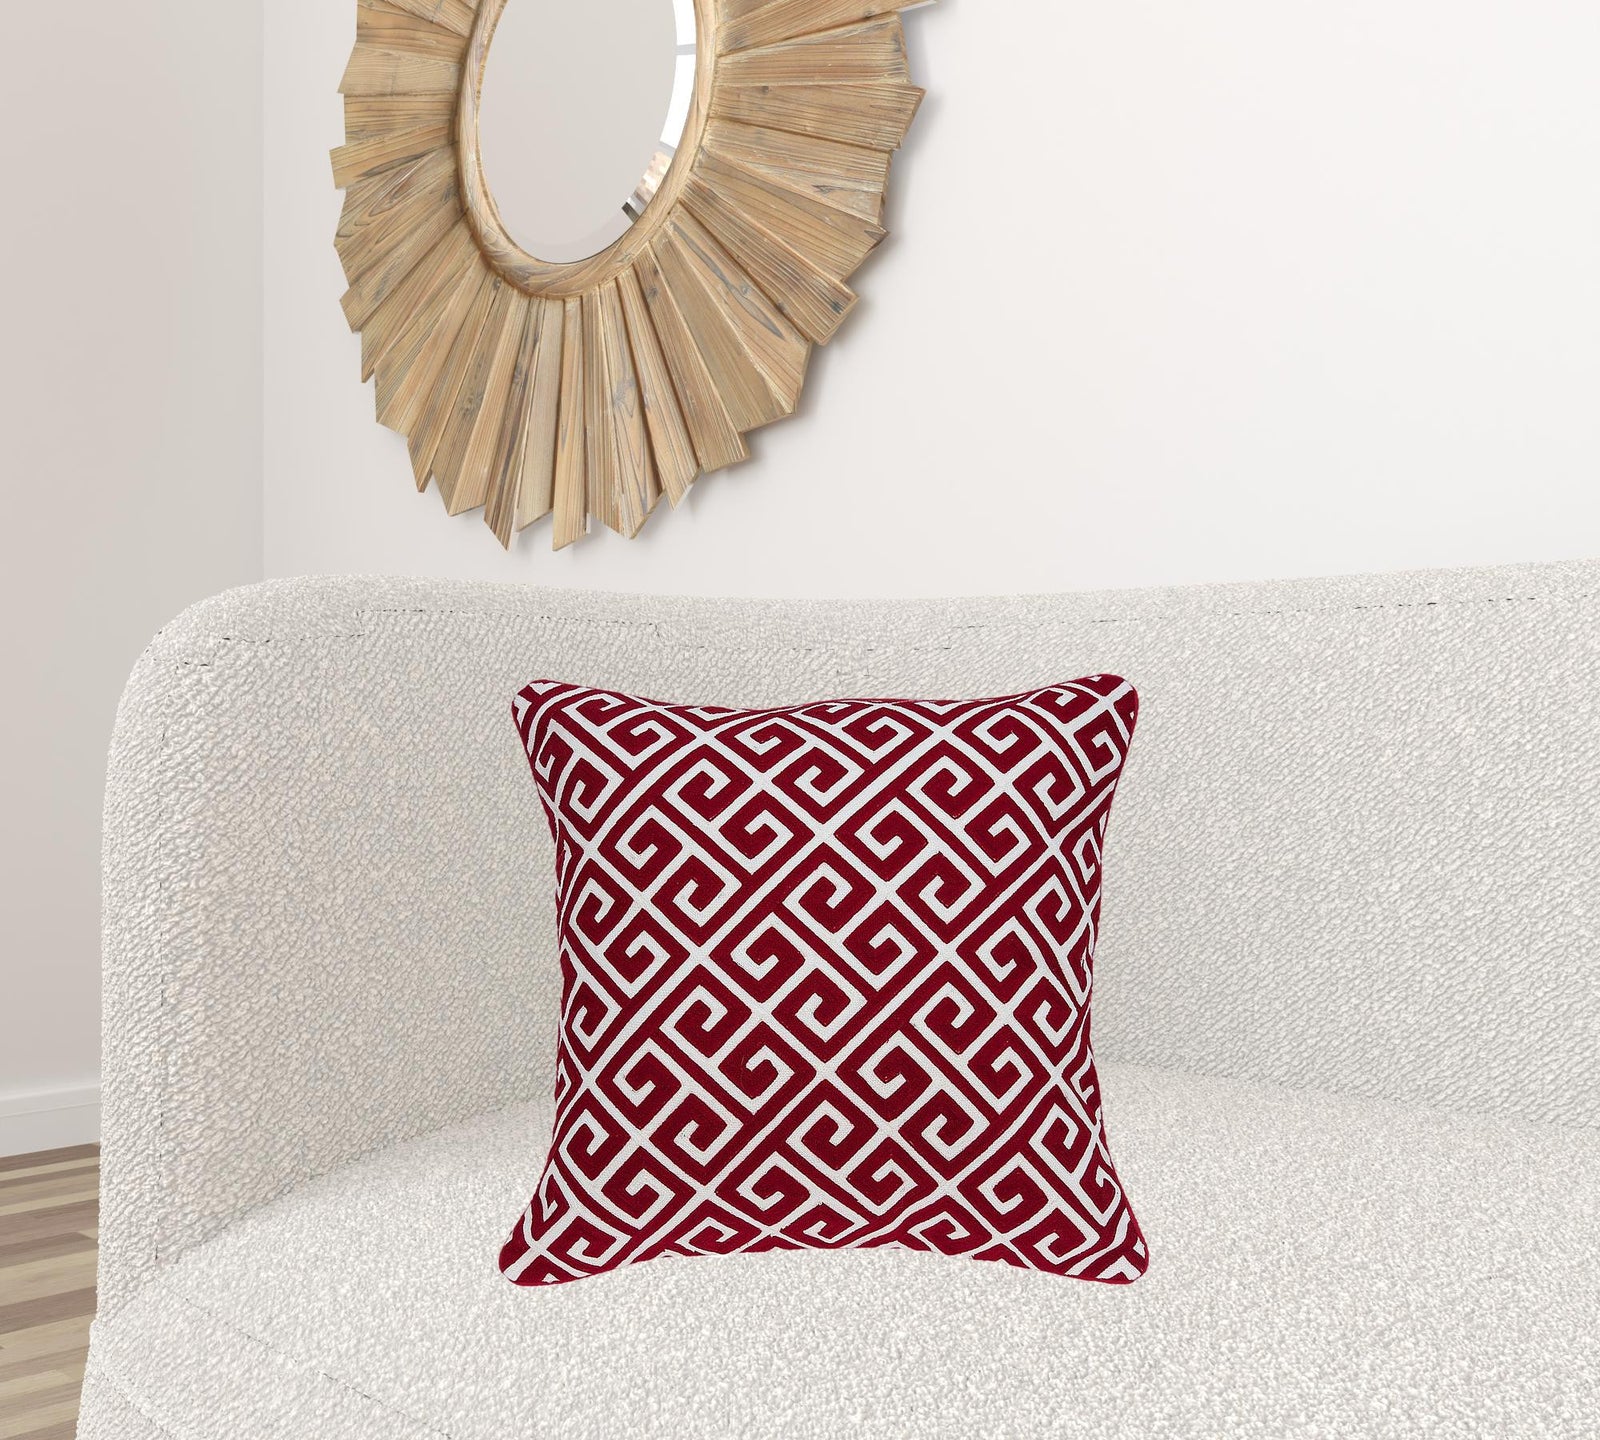 20" X 7" X 20" Transitional Red And White Cotton Pillow Cover With Poly Insert